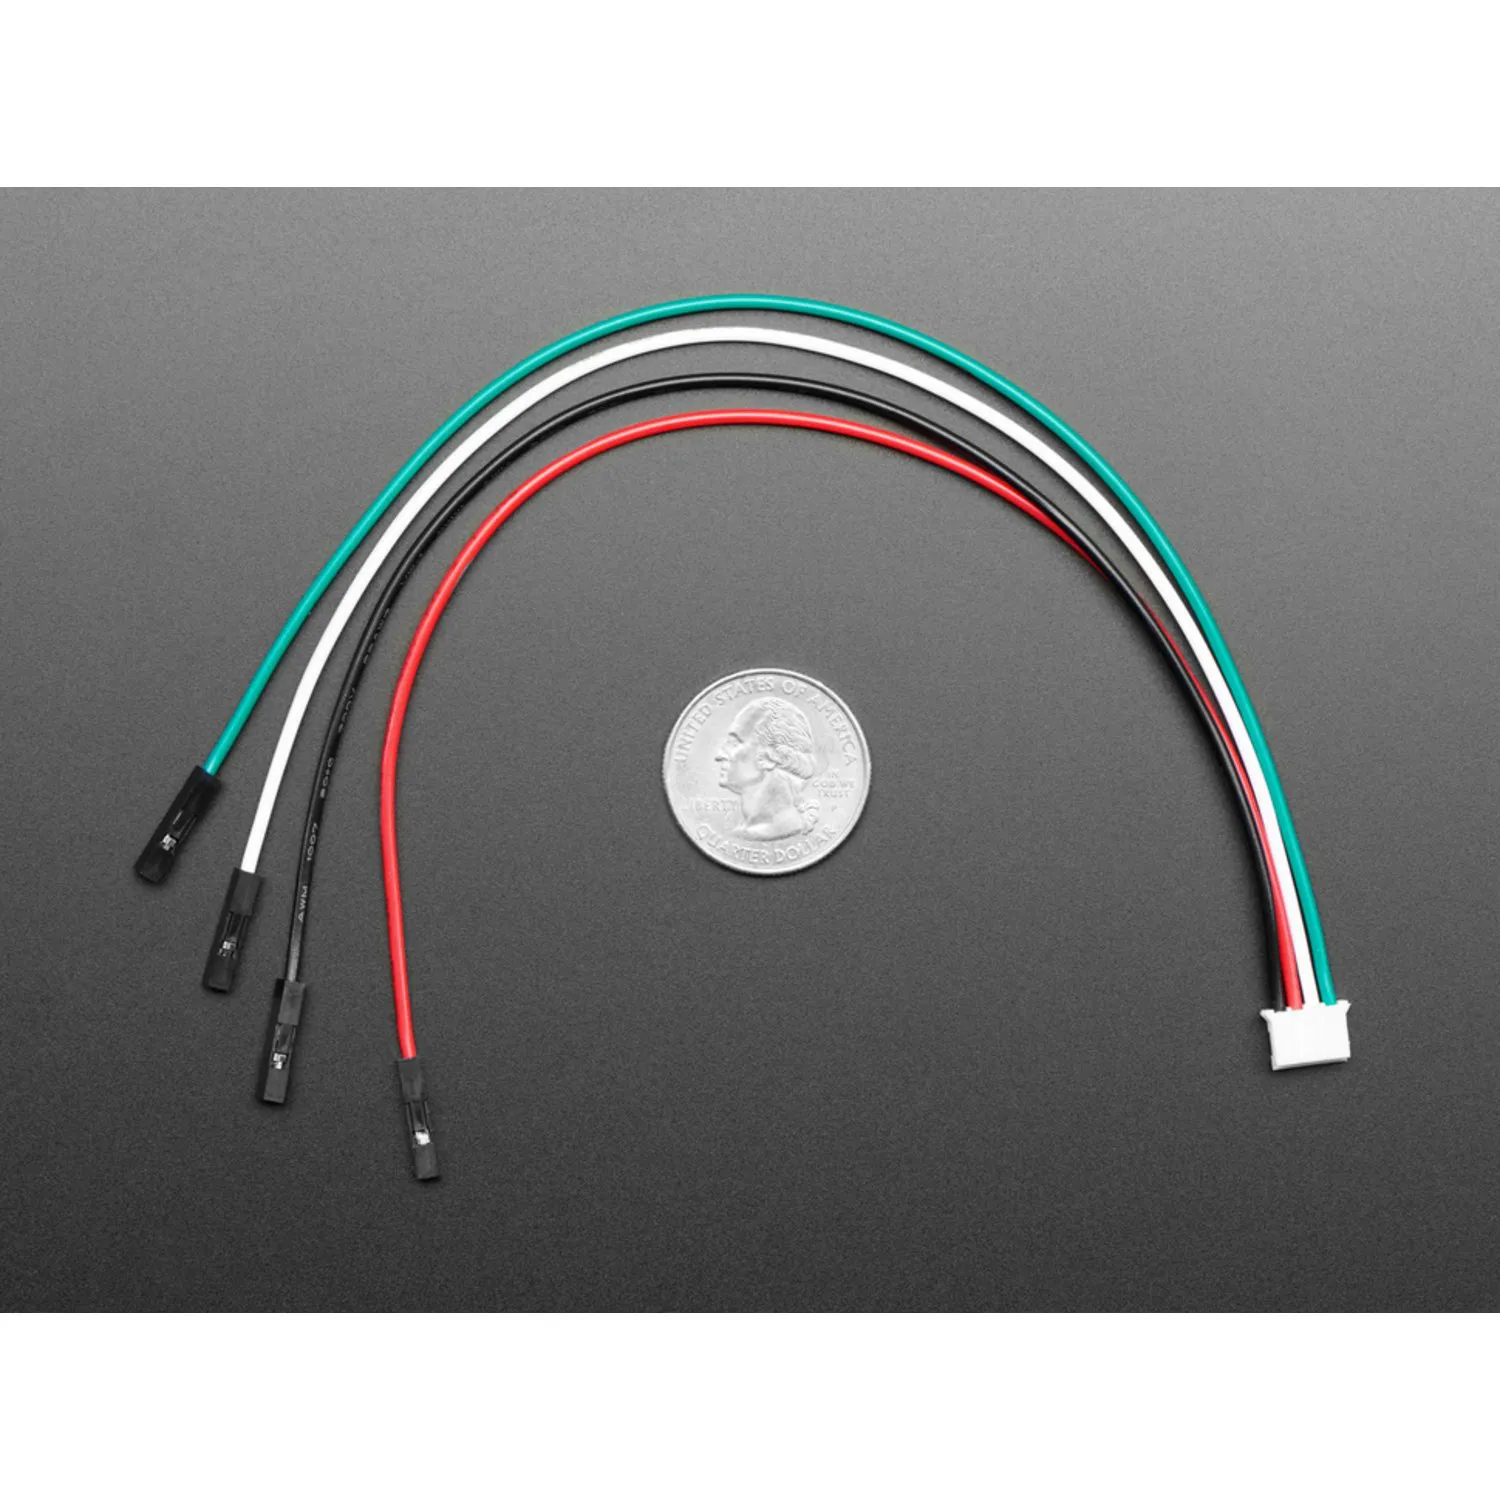 Photo of JST PH 4-Pin to Female Socket Cable - I2C STEMMA Cable - 200mm